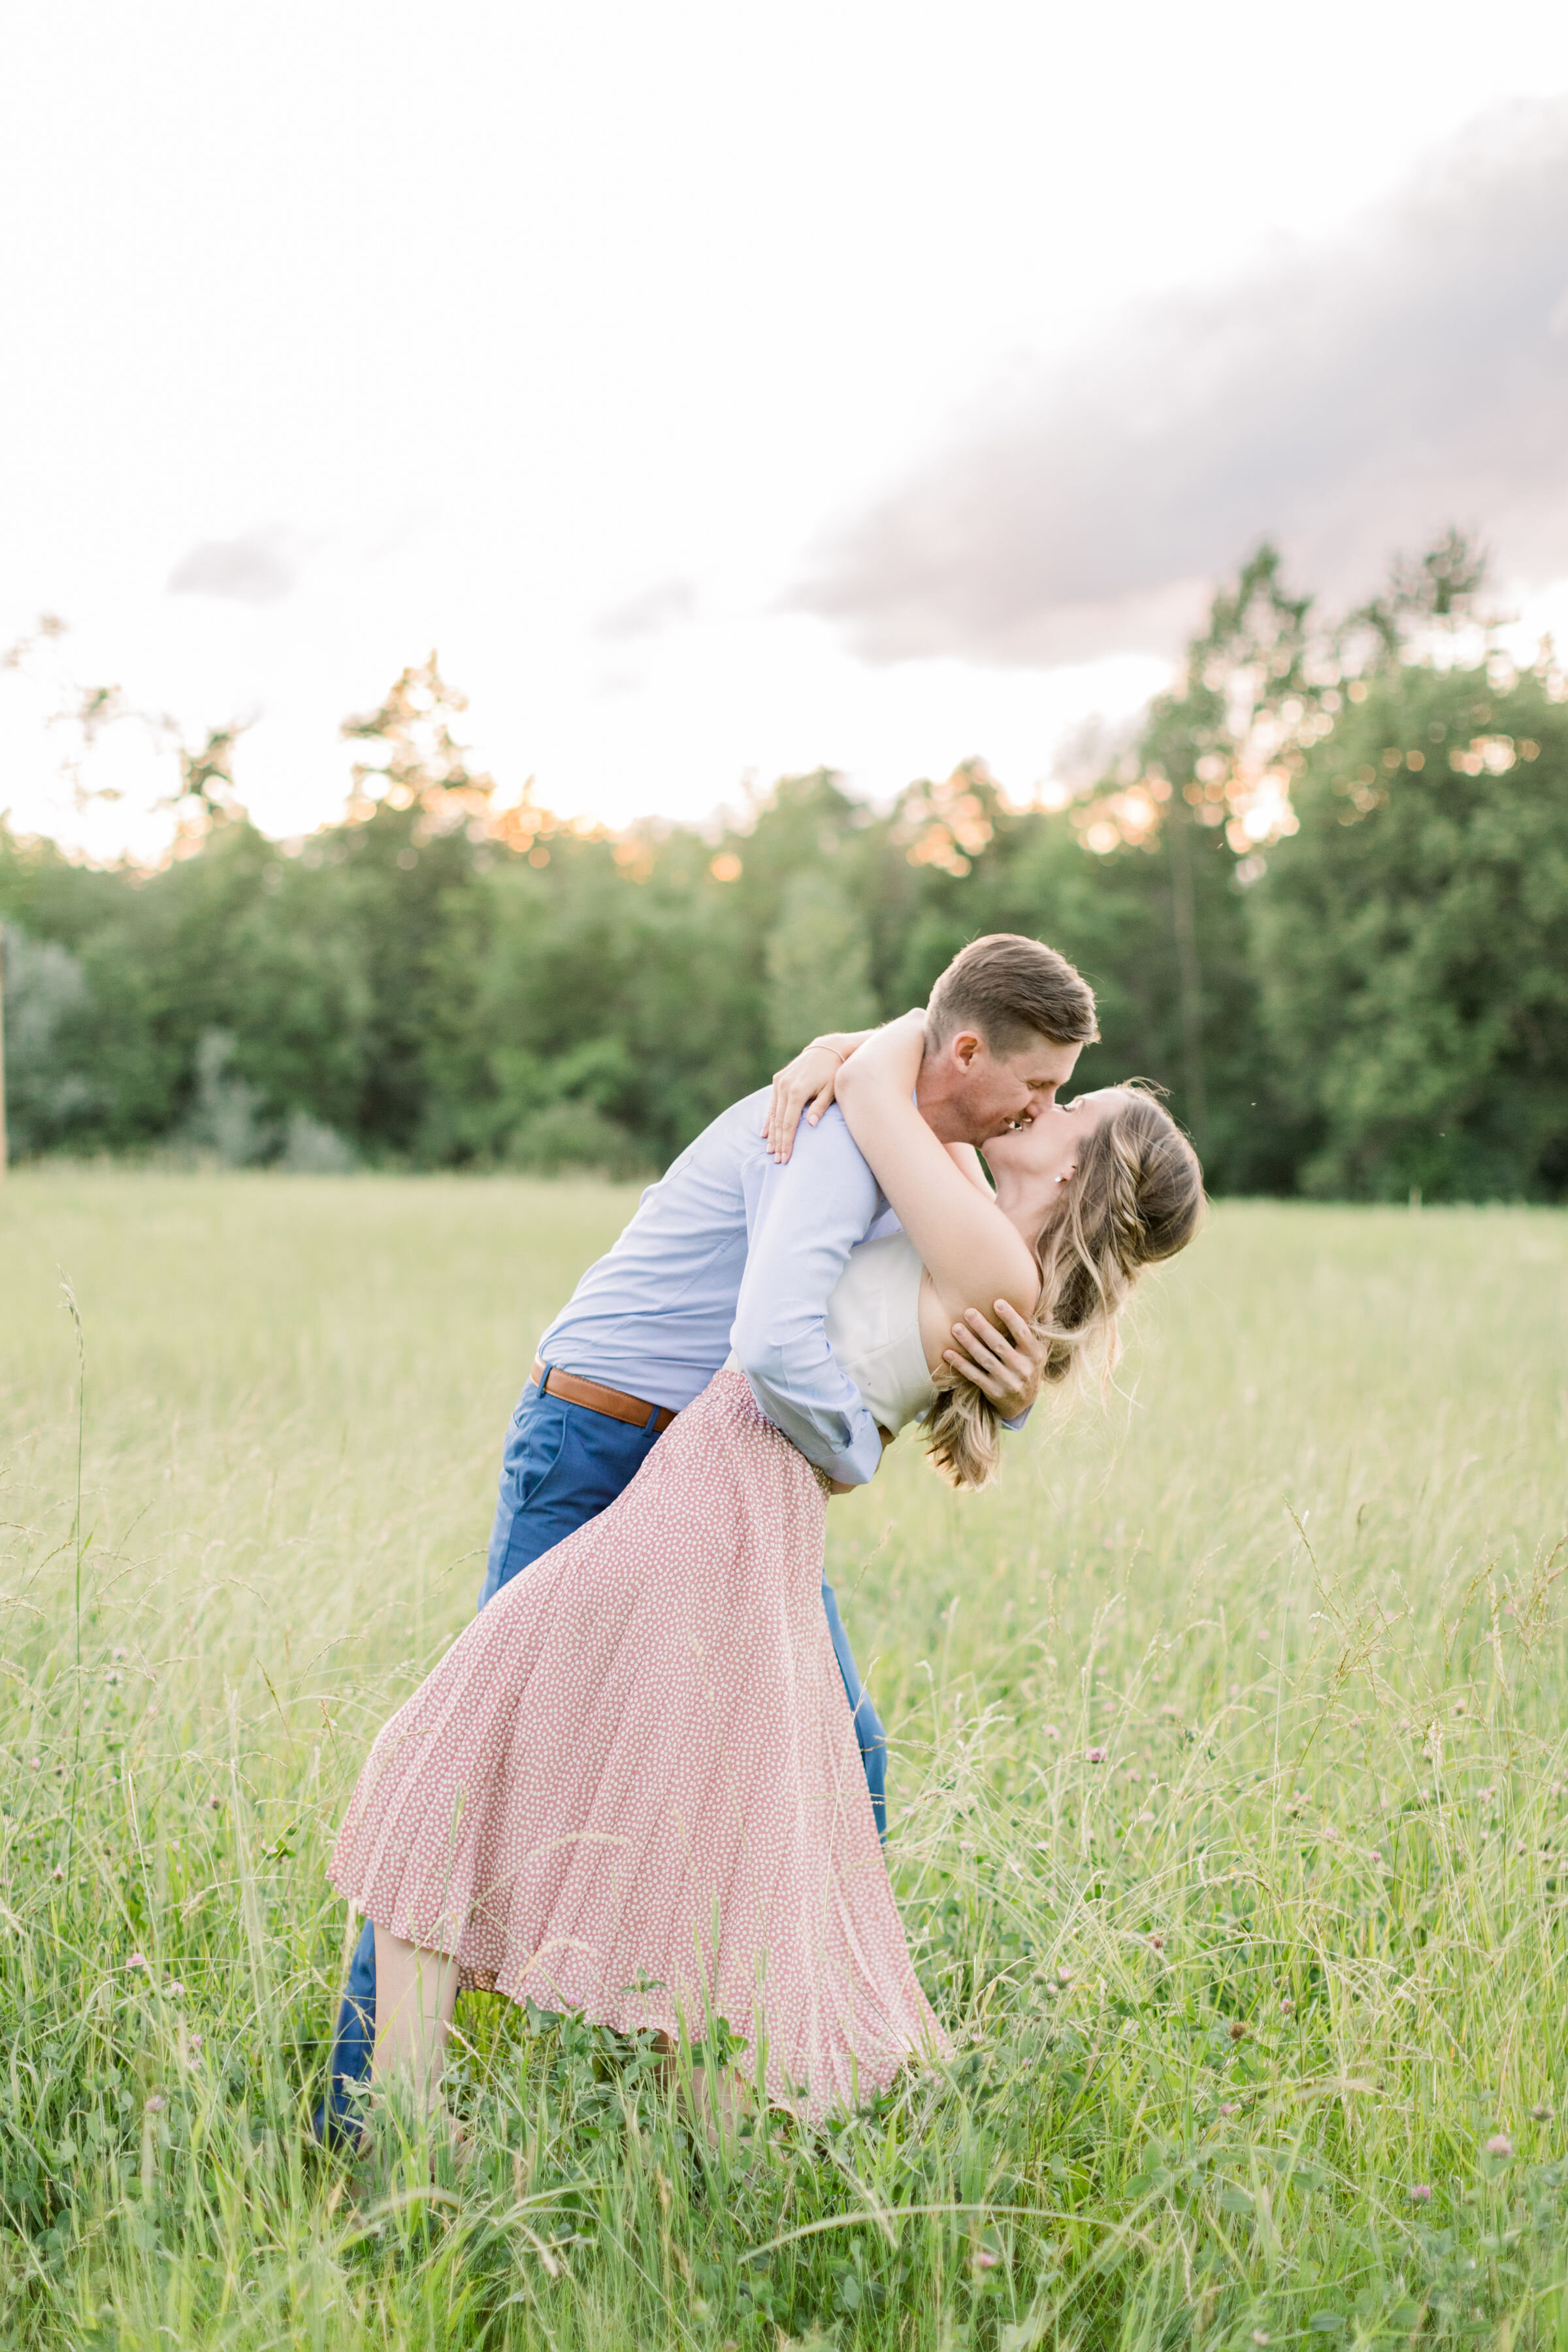  Couple doing a dip kiss pose wearing white and pink and blue in a green field during a summer engagement photoshoot in Ottawa, ON by Chelsea Mason Photography. kissing couple poses cute engagement poses for engagements outdoor locations for photosho